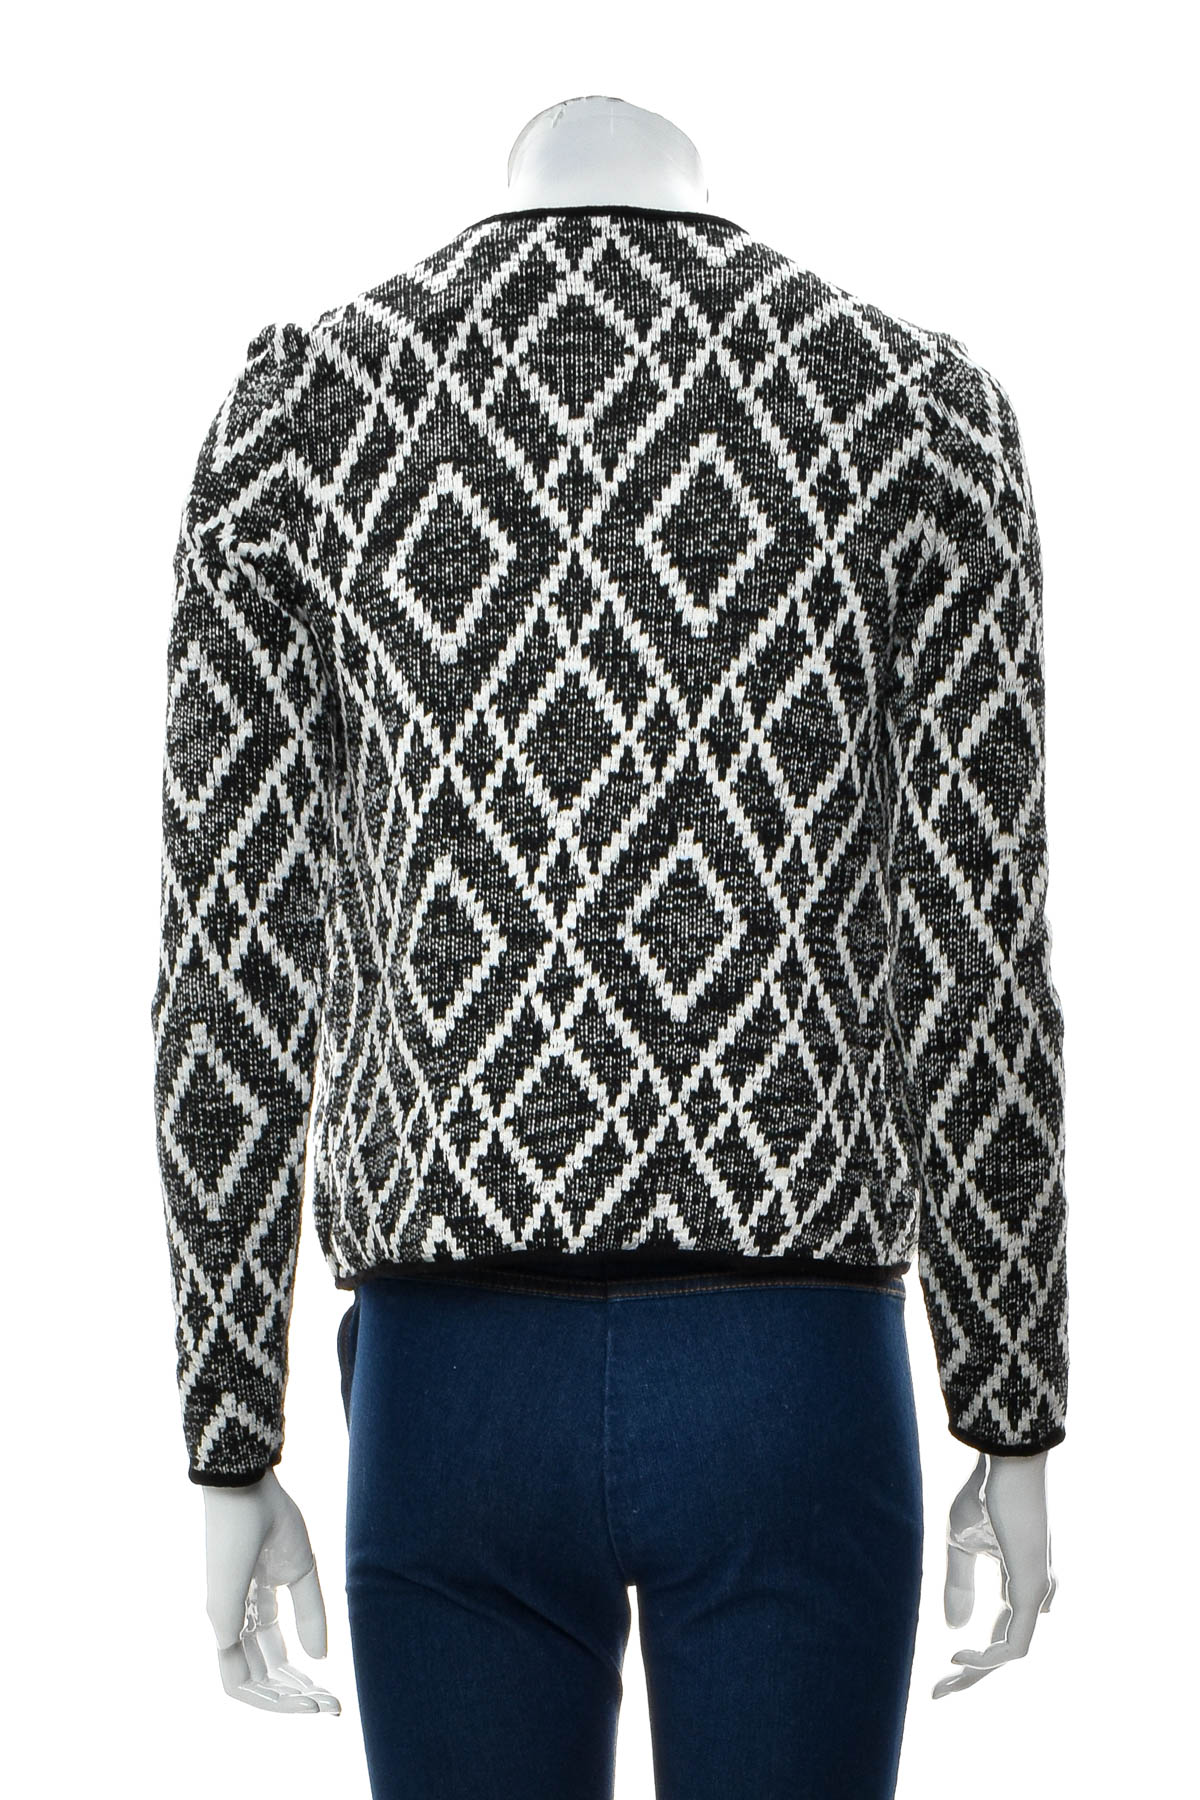 Women's cardigan - ONLY - 1